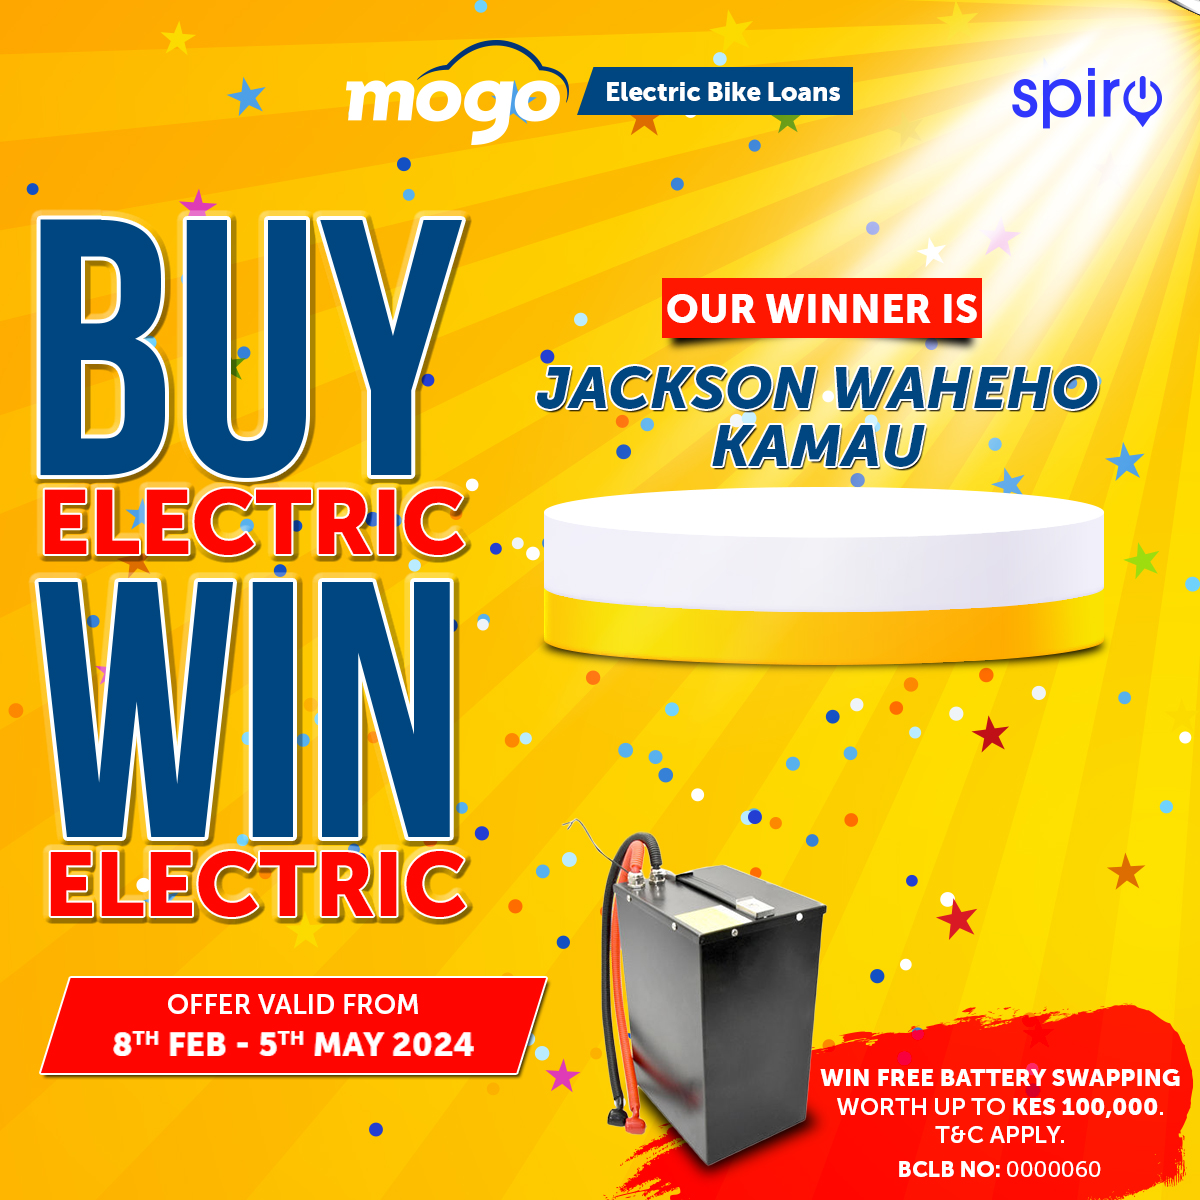 🎉CONGRATULATIONS, JACKSON WAHEHO KAMAU! 🎊You are our winner for free battery swapping worth up to KES 100,000! You never have to worry about battery swapping costs for a year, thanks to MOGO! Visit apply.mogo.co.ke/hzx to apply & stay tuned for more deals! #MogoKe #ApplyNow